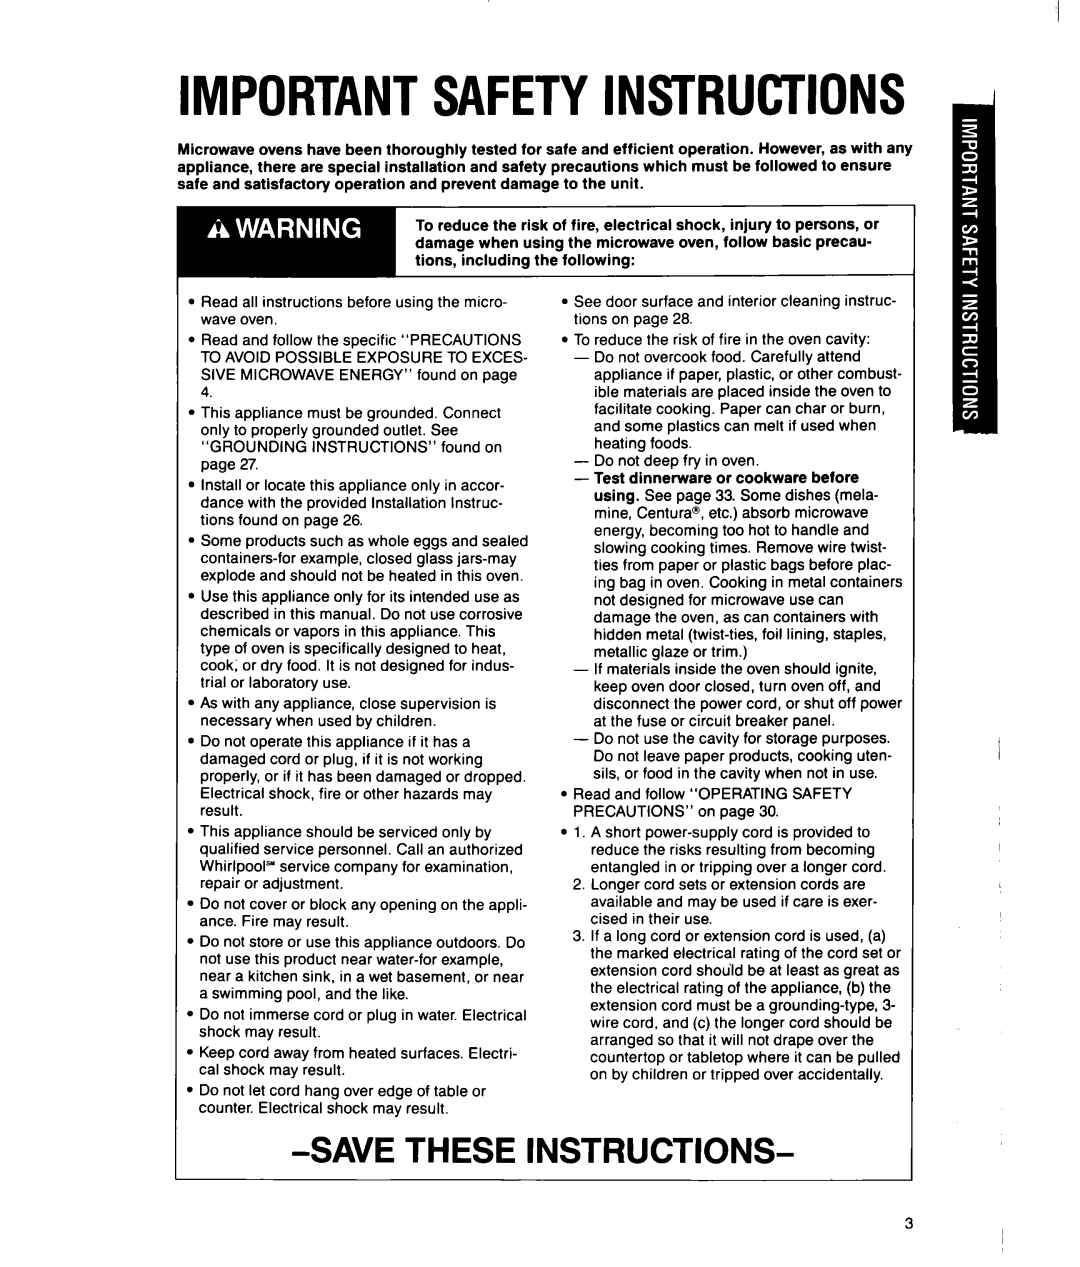 Whirlpool MSI065XY, MSI040XY user manual Importantsafetyinstructions, Read and follow Operating Safety Precautions on 